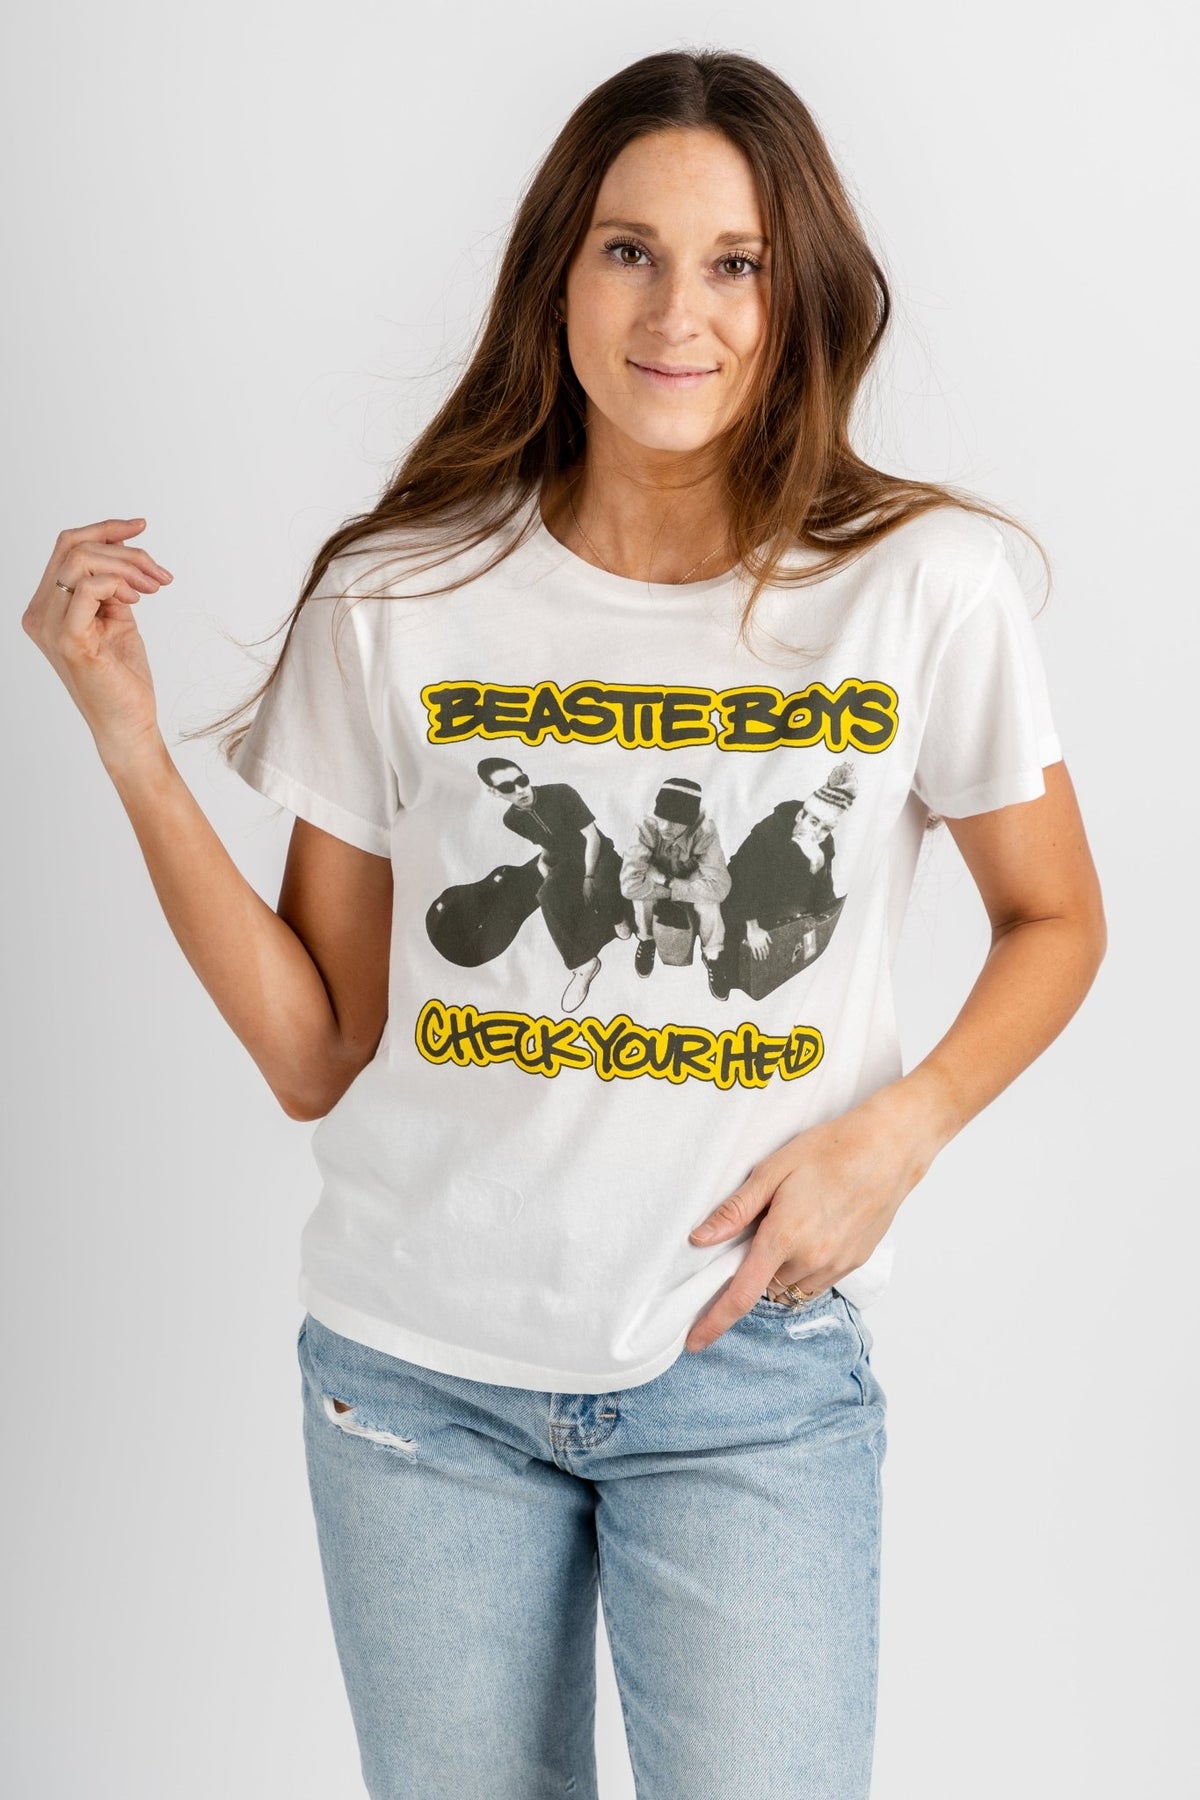 DayDreamer Beastie Boys Check Head tee vintage white - Trendy Band T-Shirts and Sweatshirts at Lush Fashion Lounge Boutique in Oklahoma City